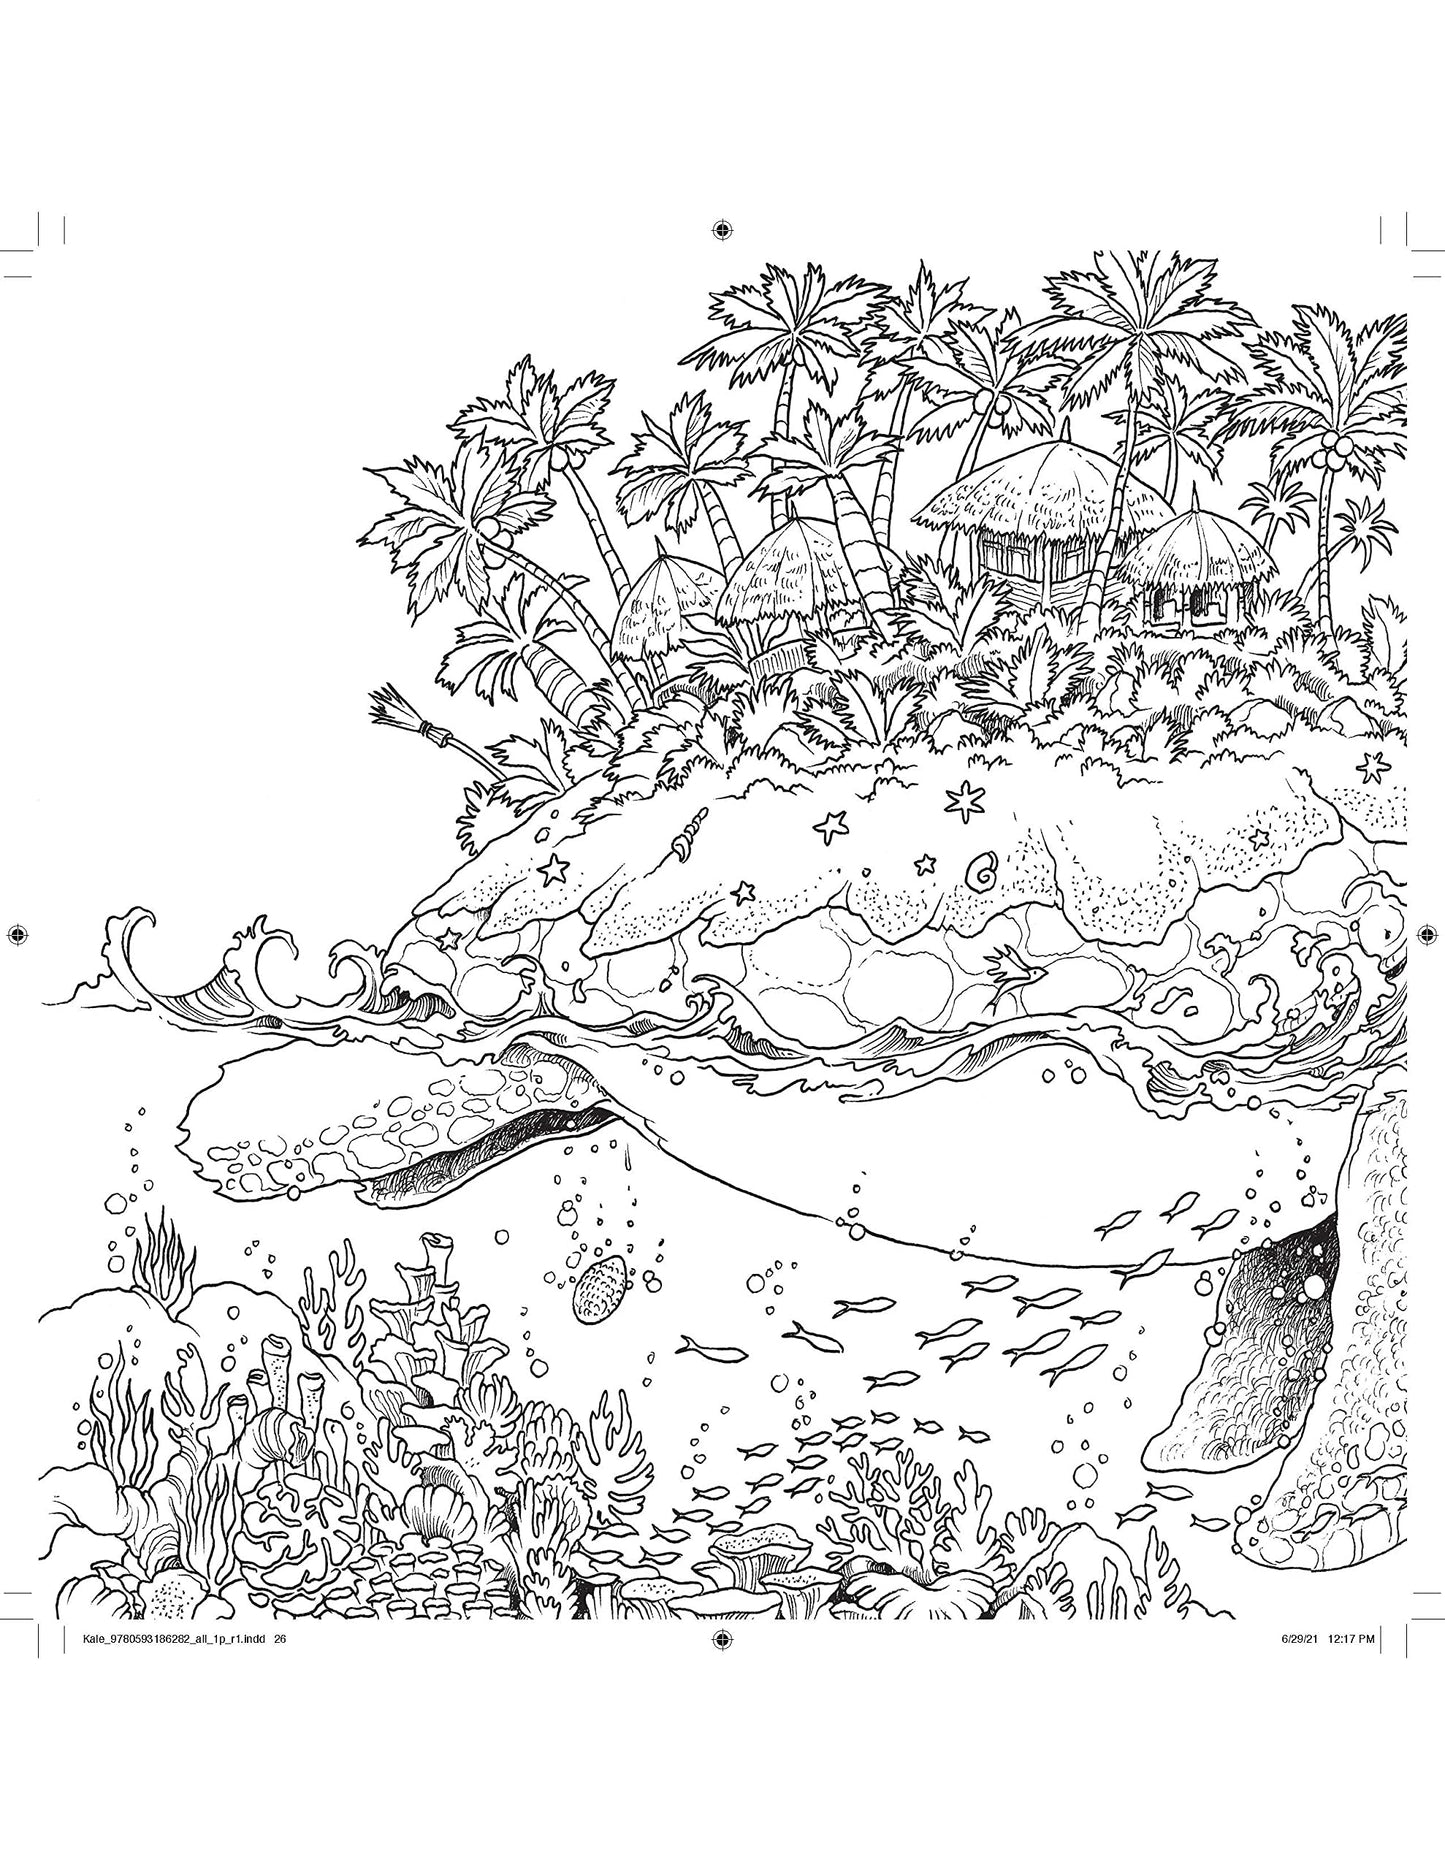 570 Coloring kerby Rosanes books ideas